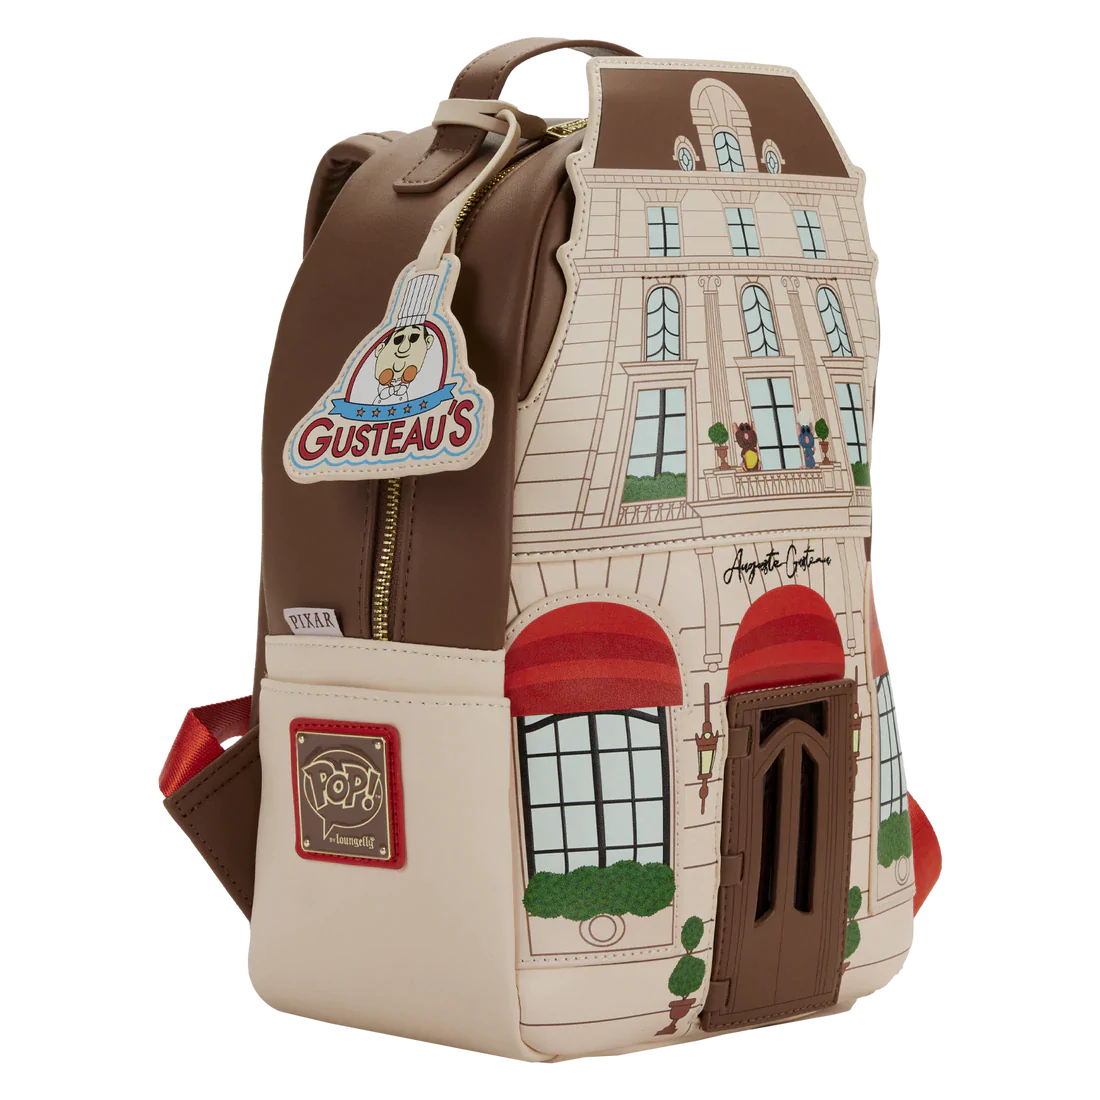 Coco Family backpack from the Pixar collection by Loungefly